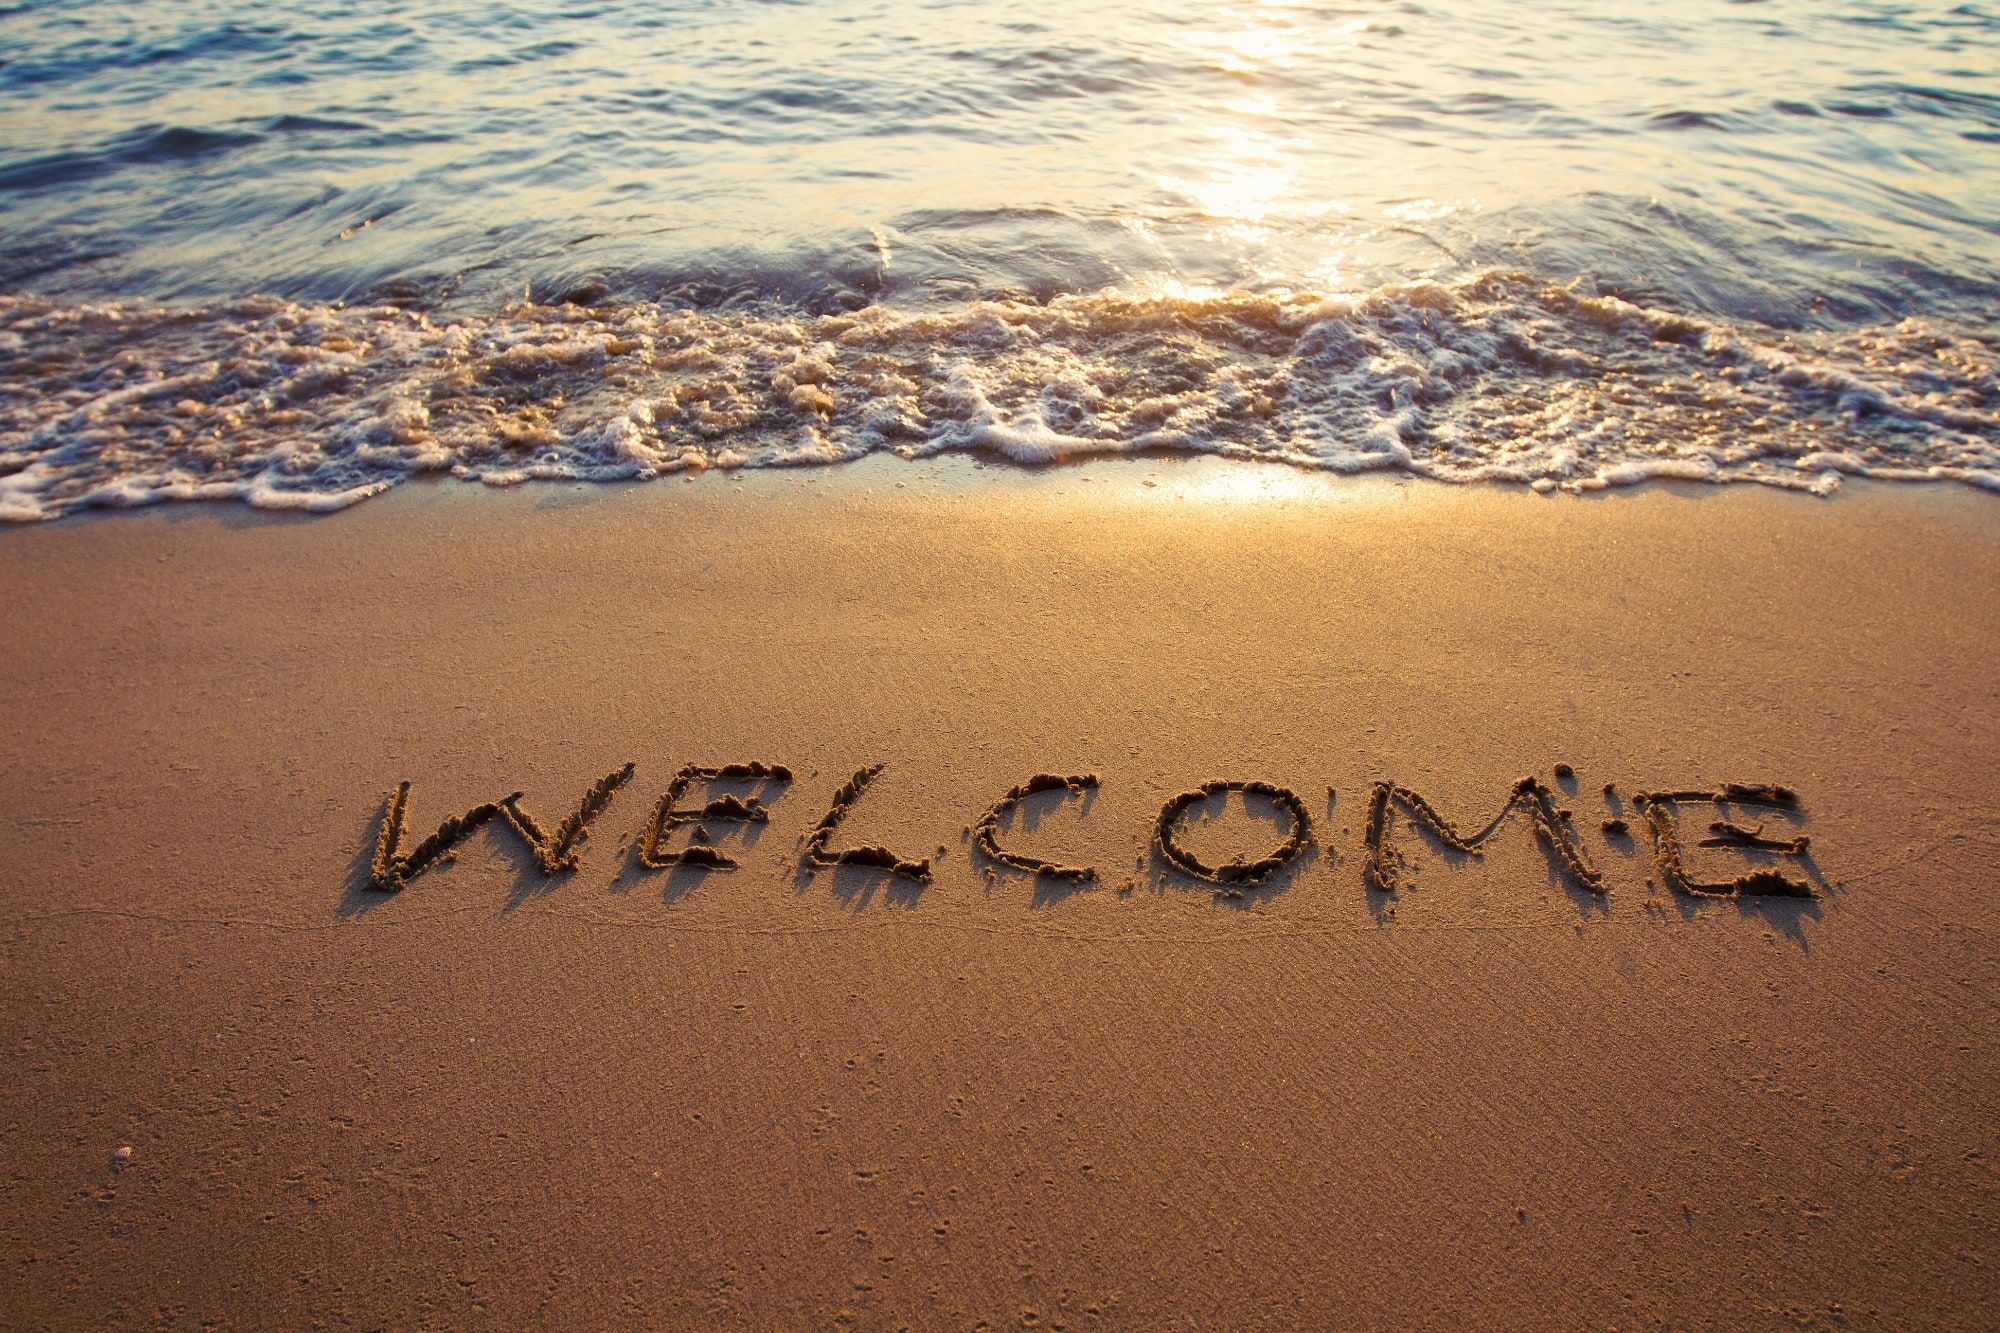 The word "Welcome" written in the sand on a golden sandy beach